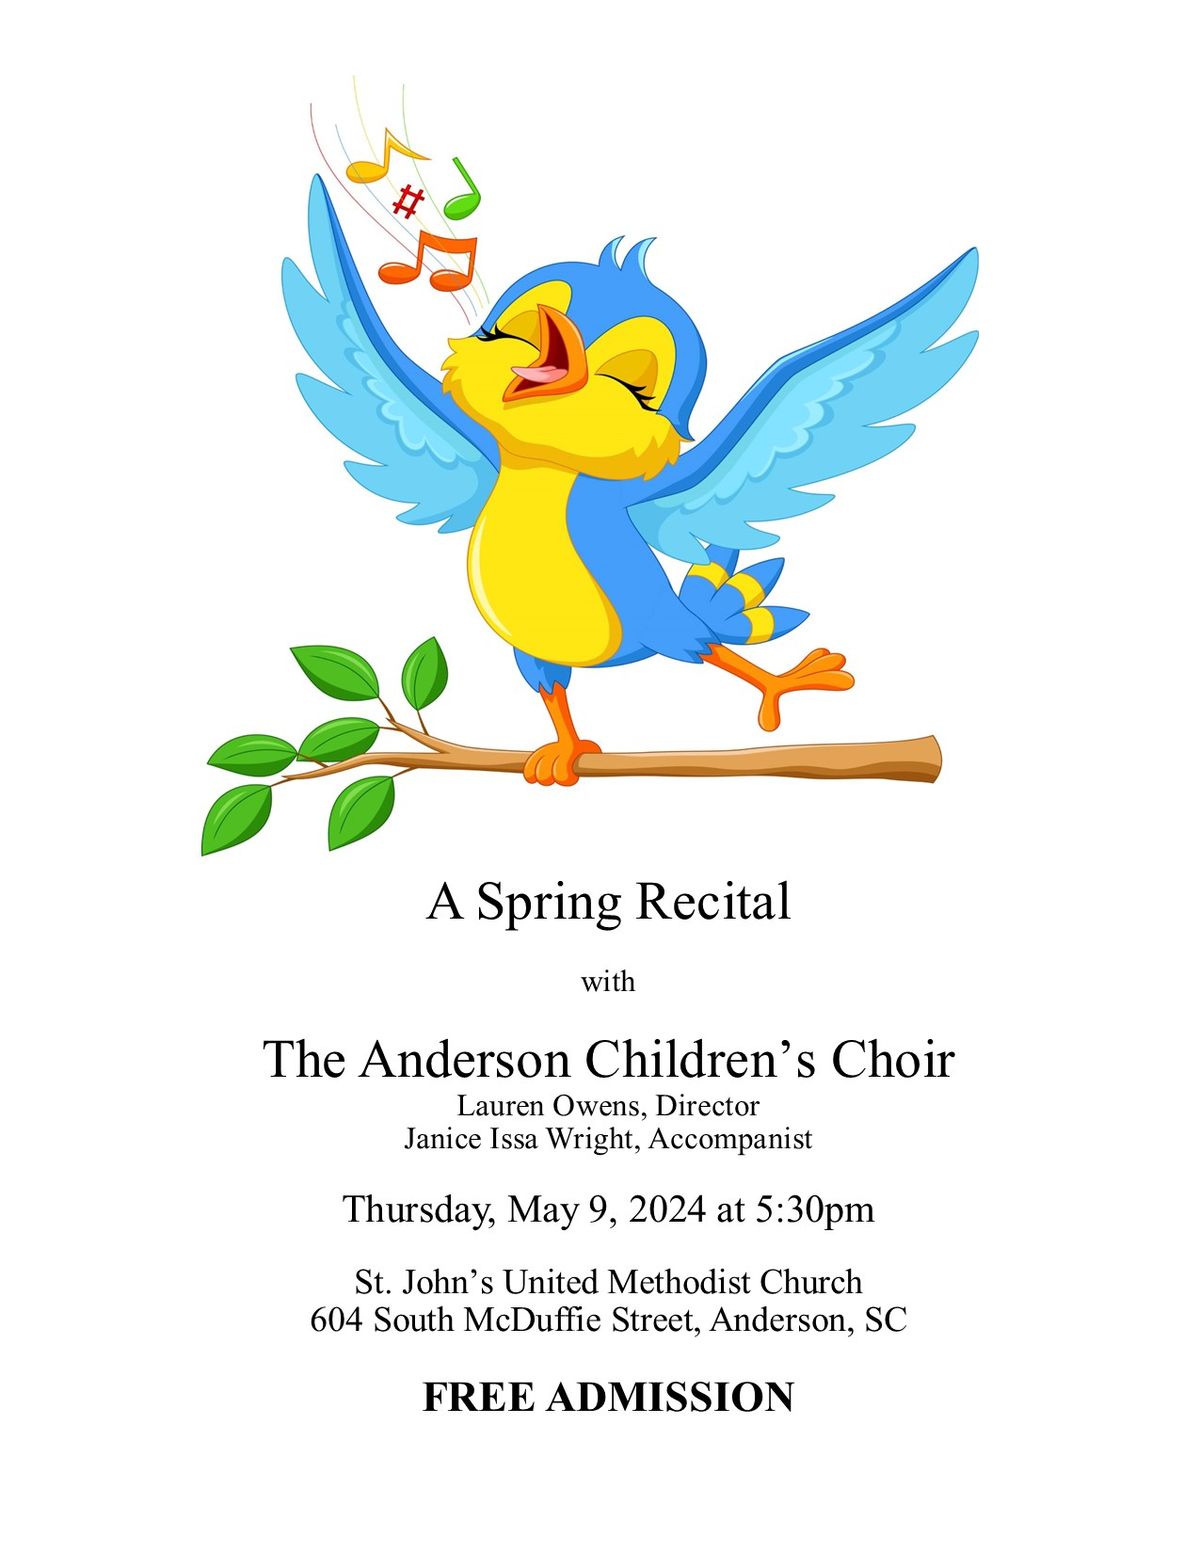 A Spring Recital featuring the Anderson Children's Choir